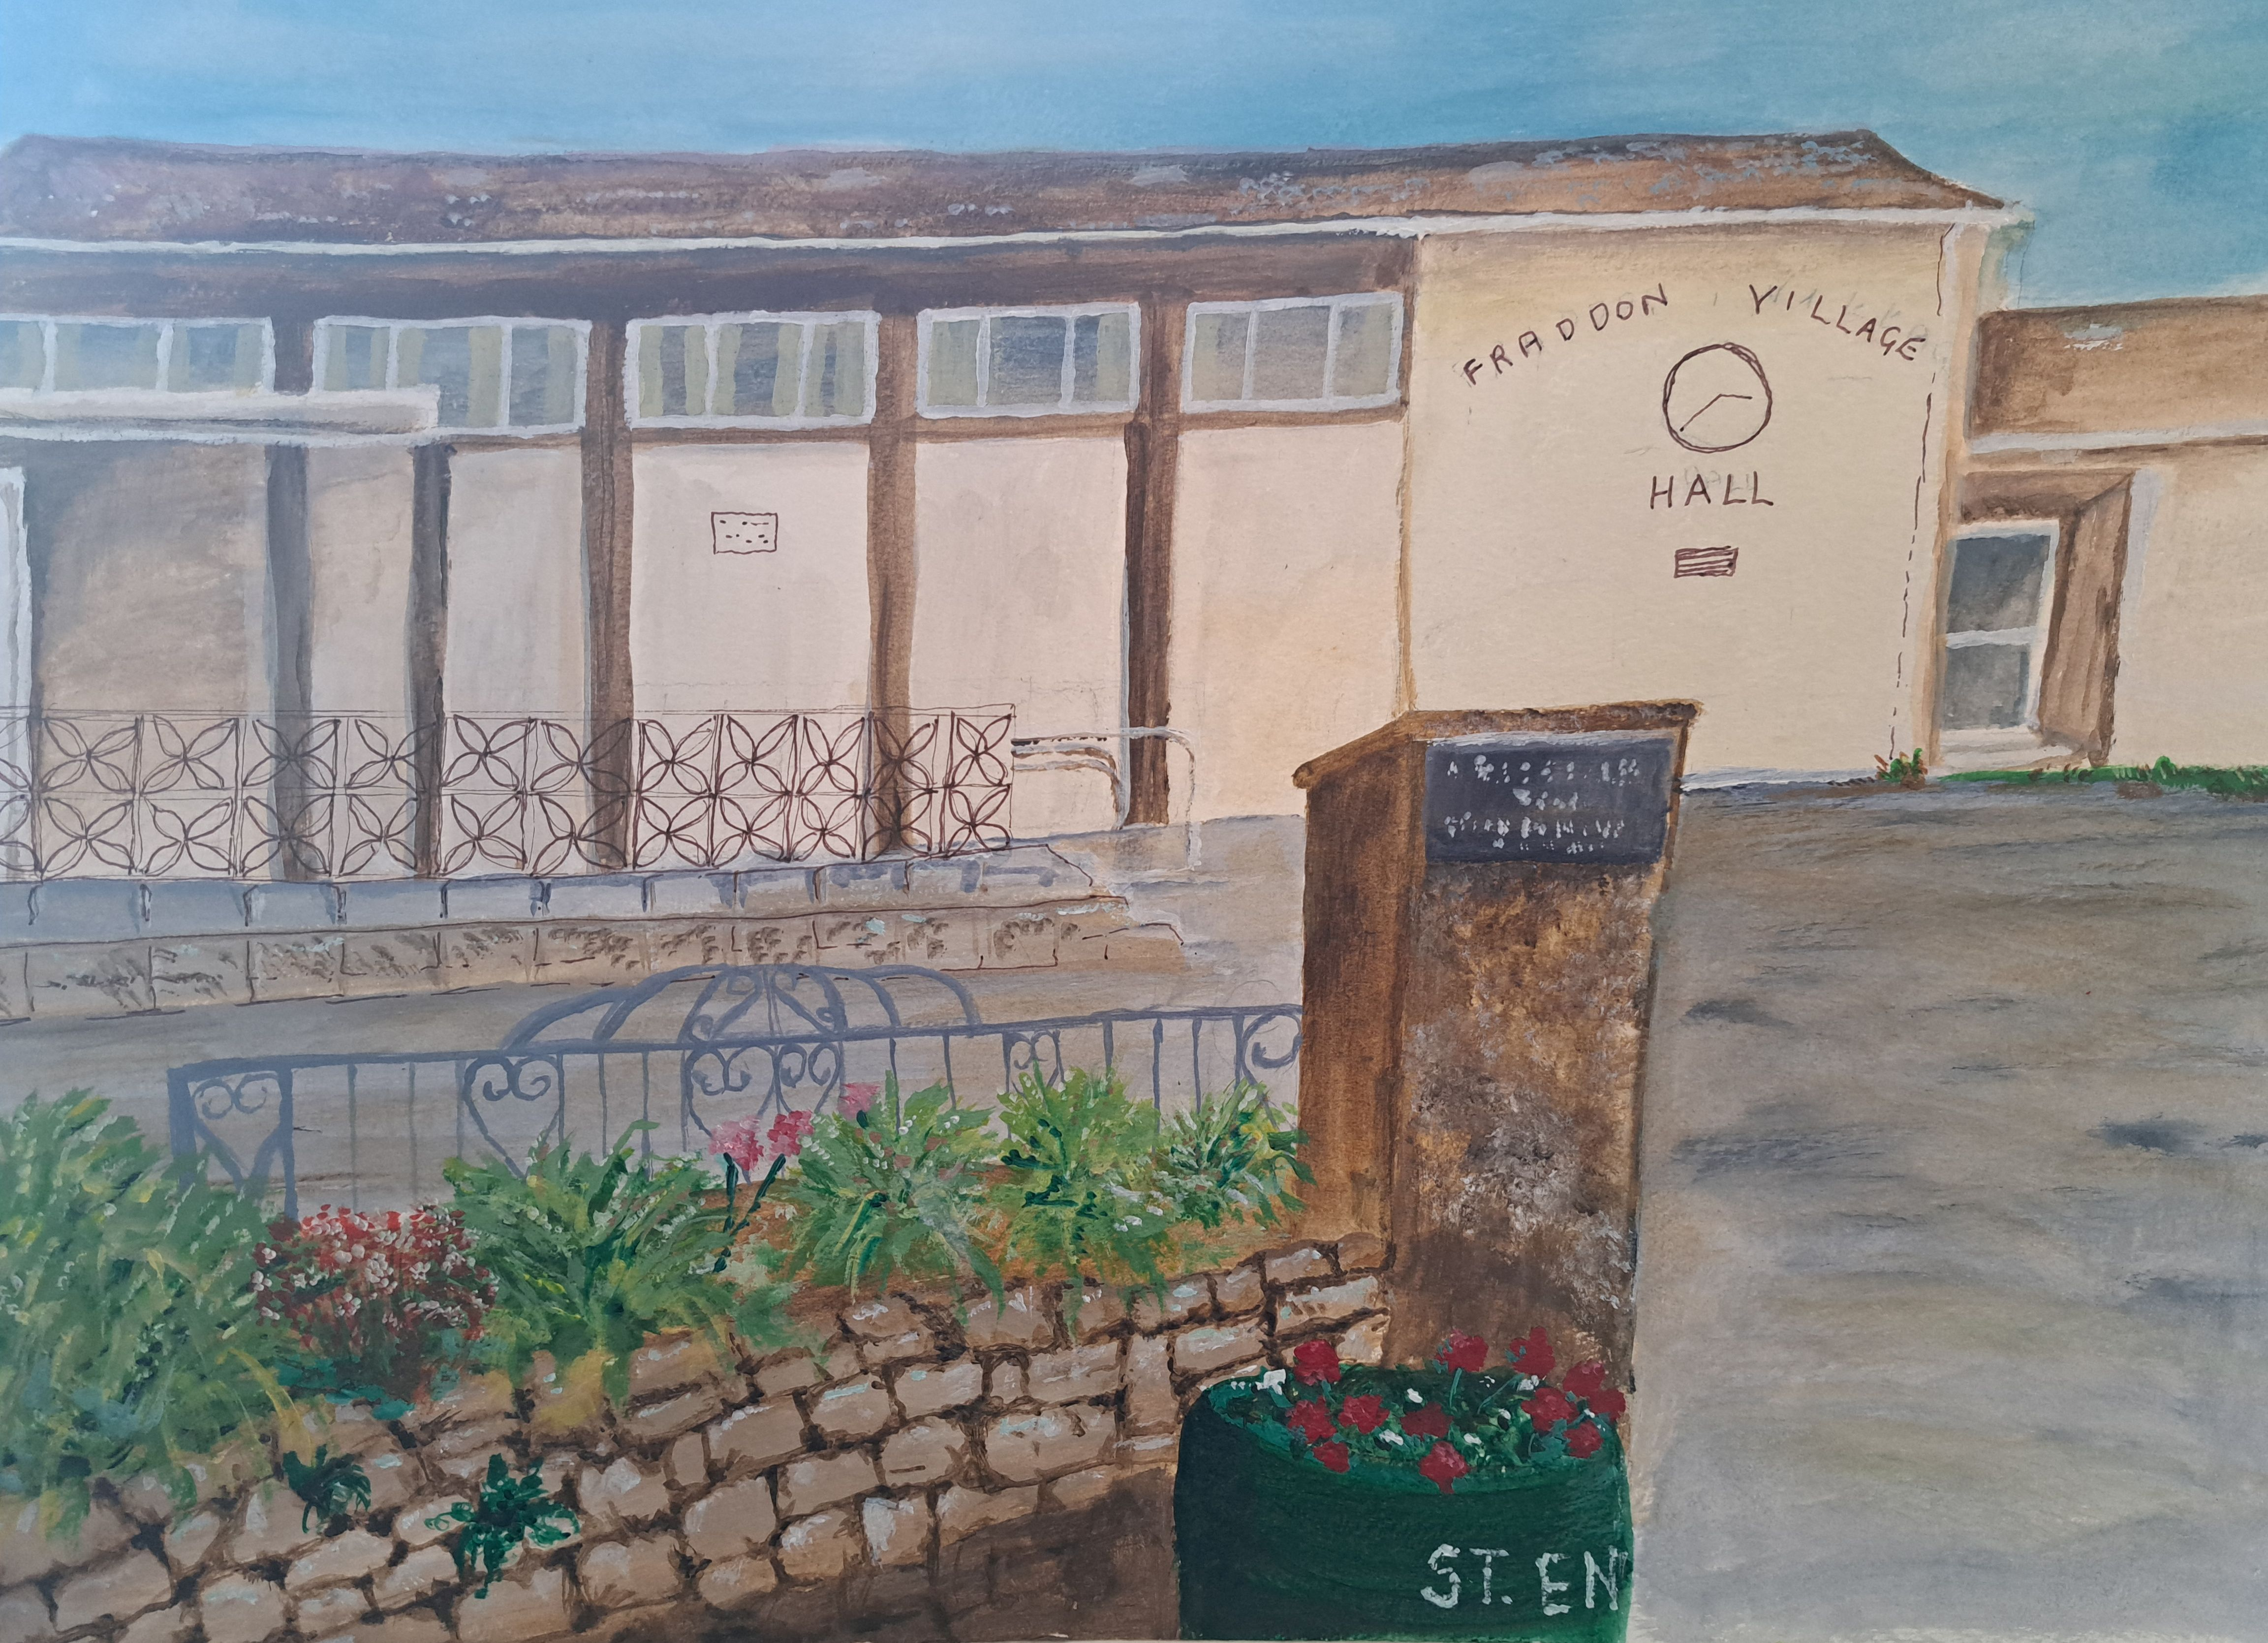 A painting of the hall by the art club